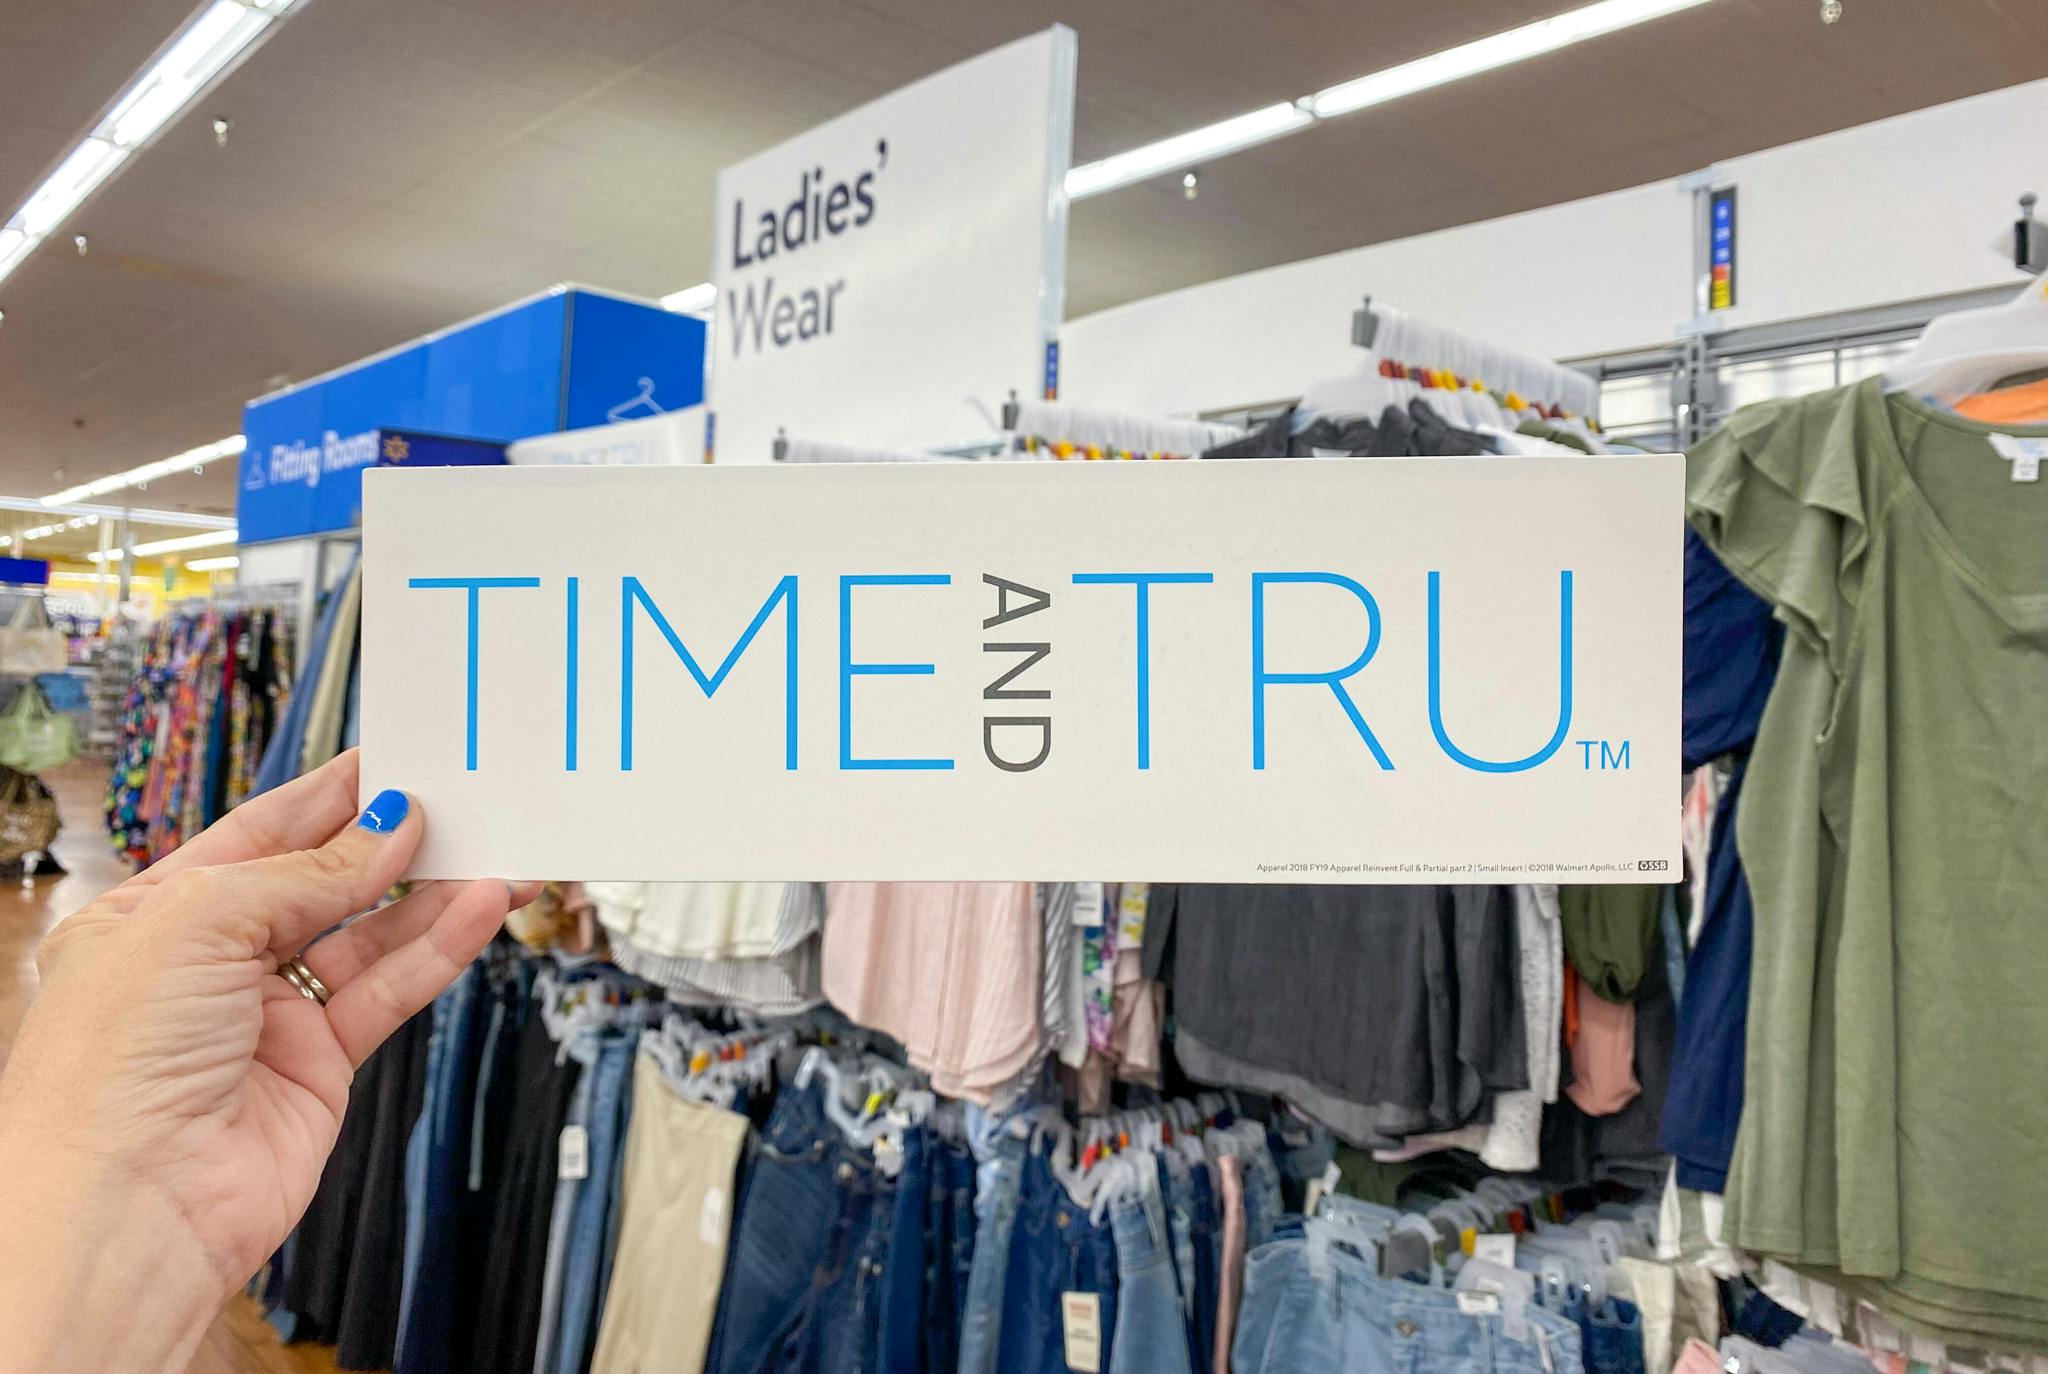 Time and Tru Weekender Bag, $24.98 at Walmart - The Krazy Coupon Lady